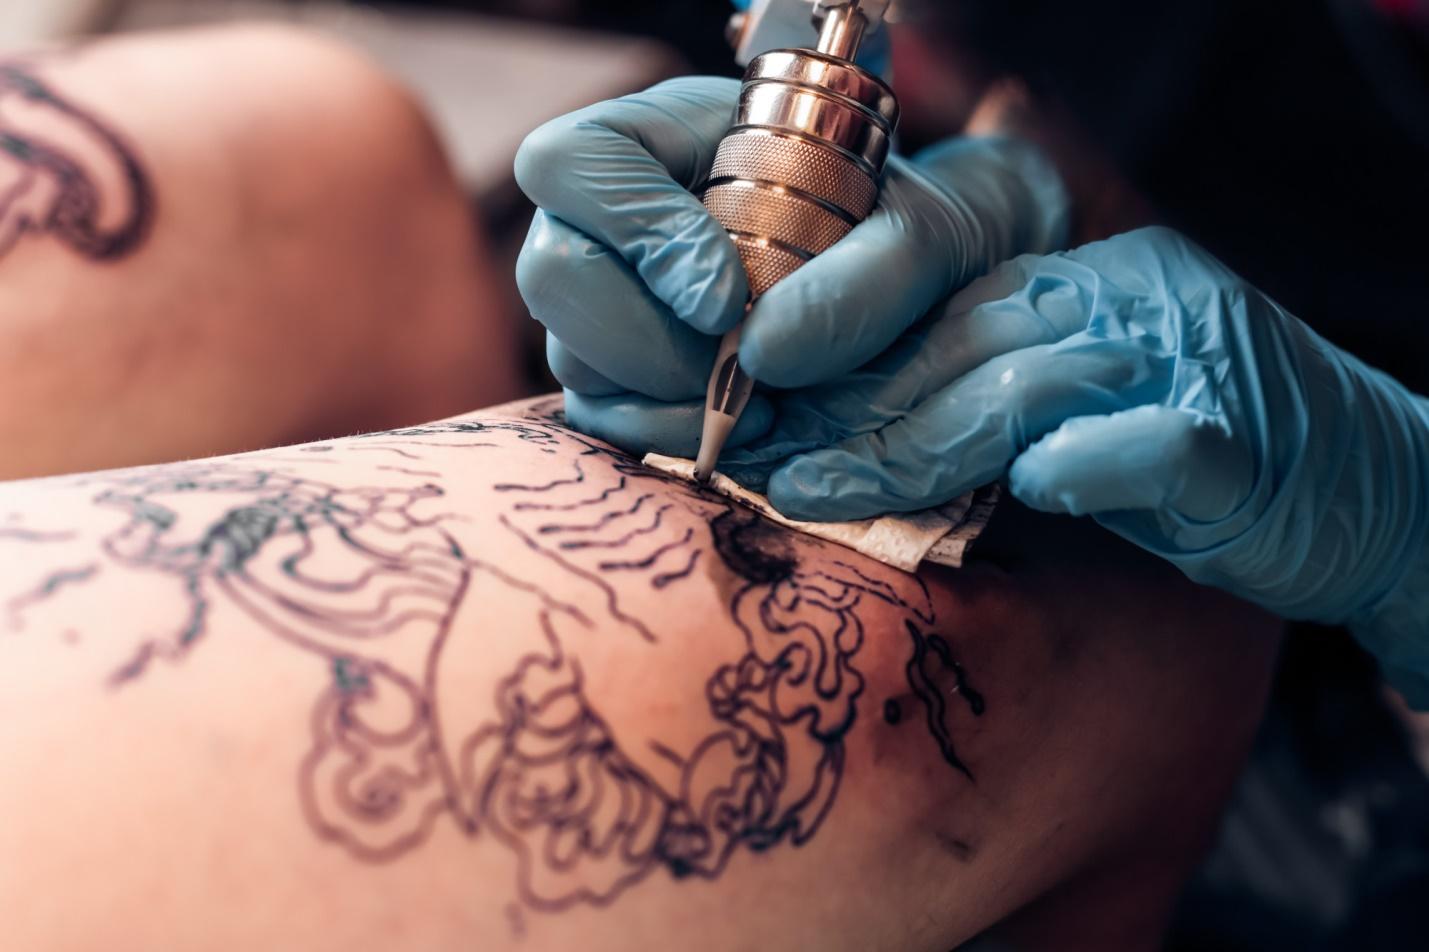 What Are the Benefits of Becoming the Best Tattoo Artist?